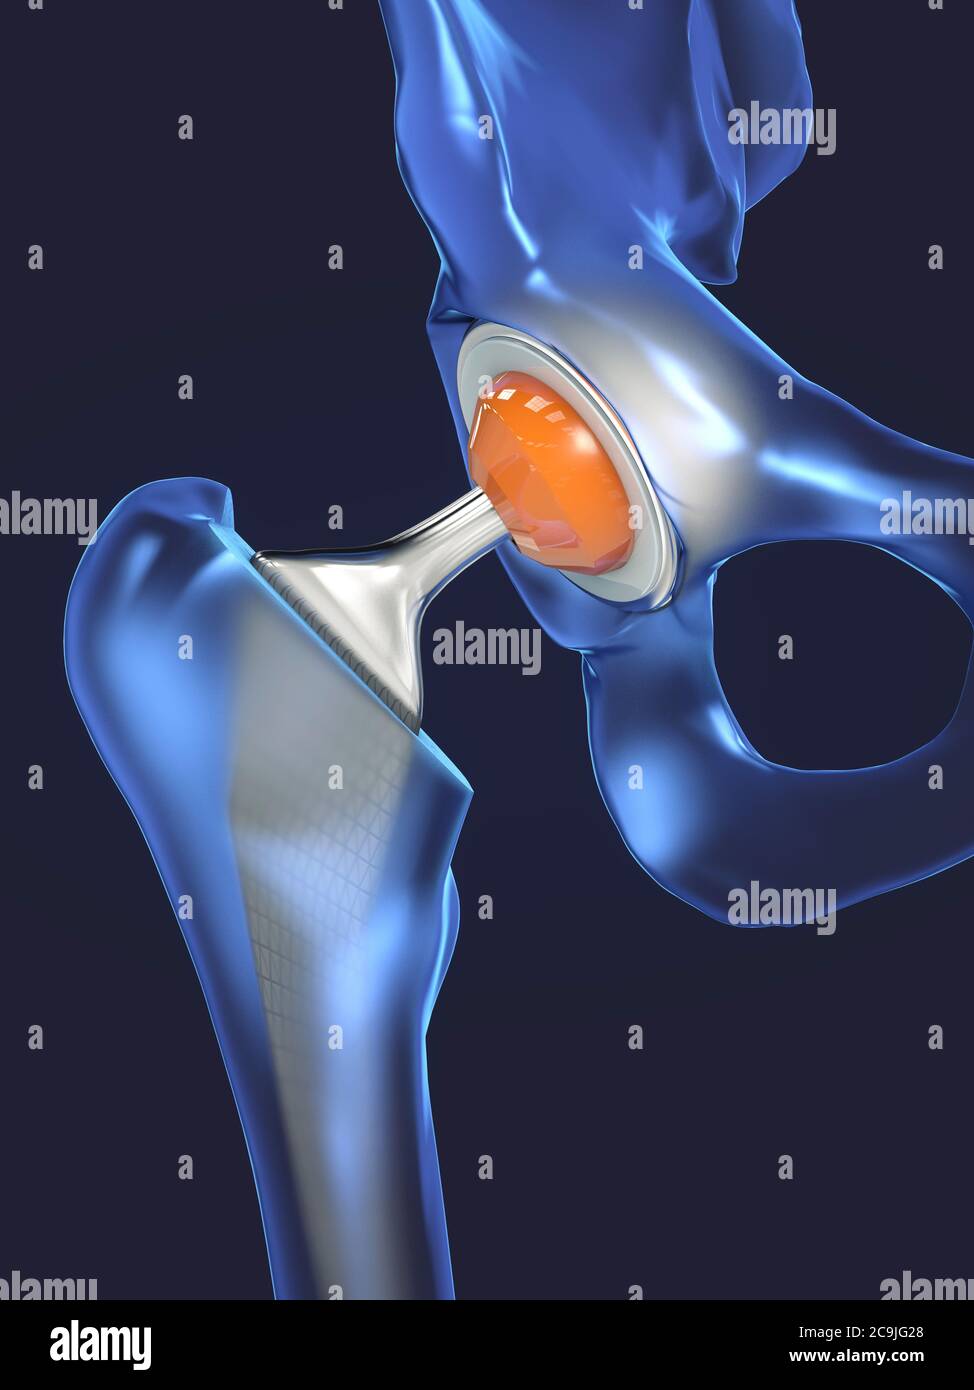 Hip replacement, illustration. Stock Photo